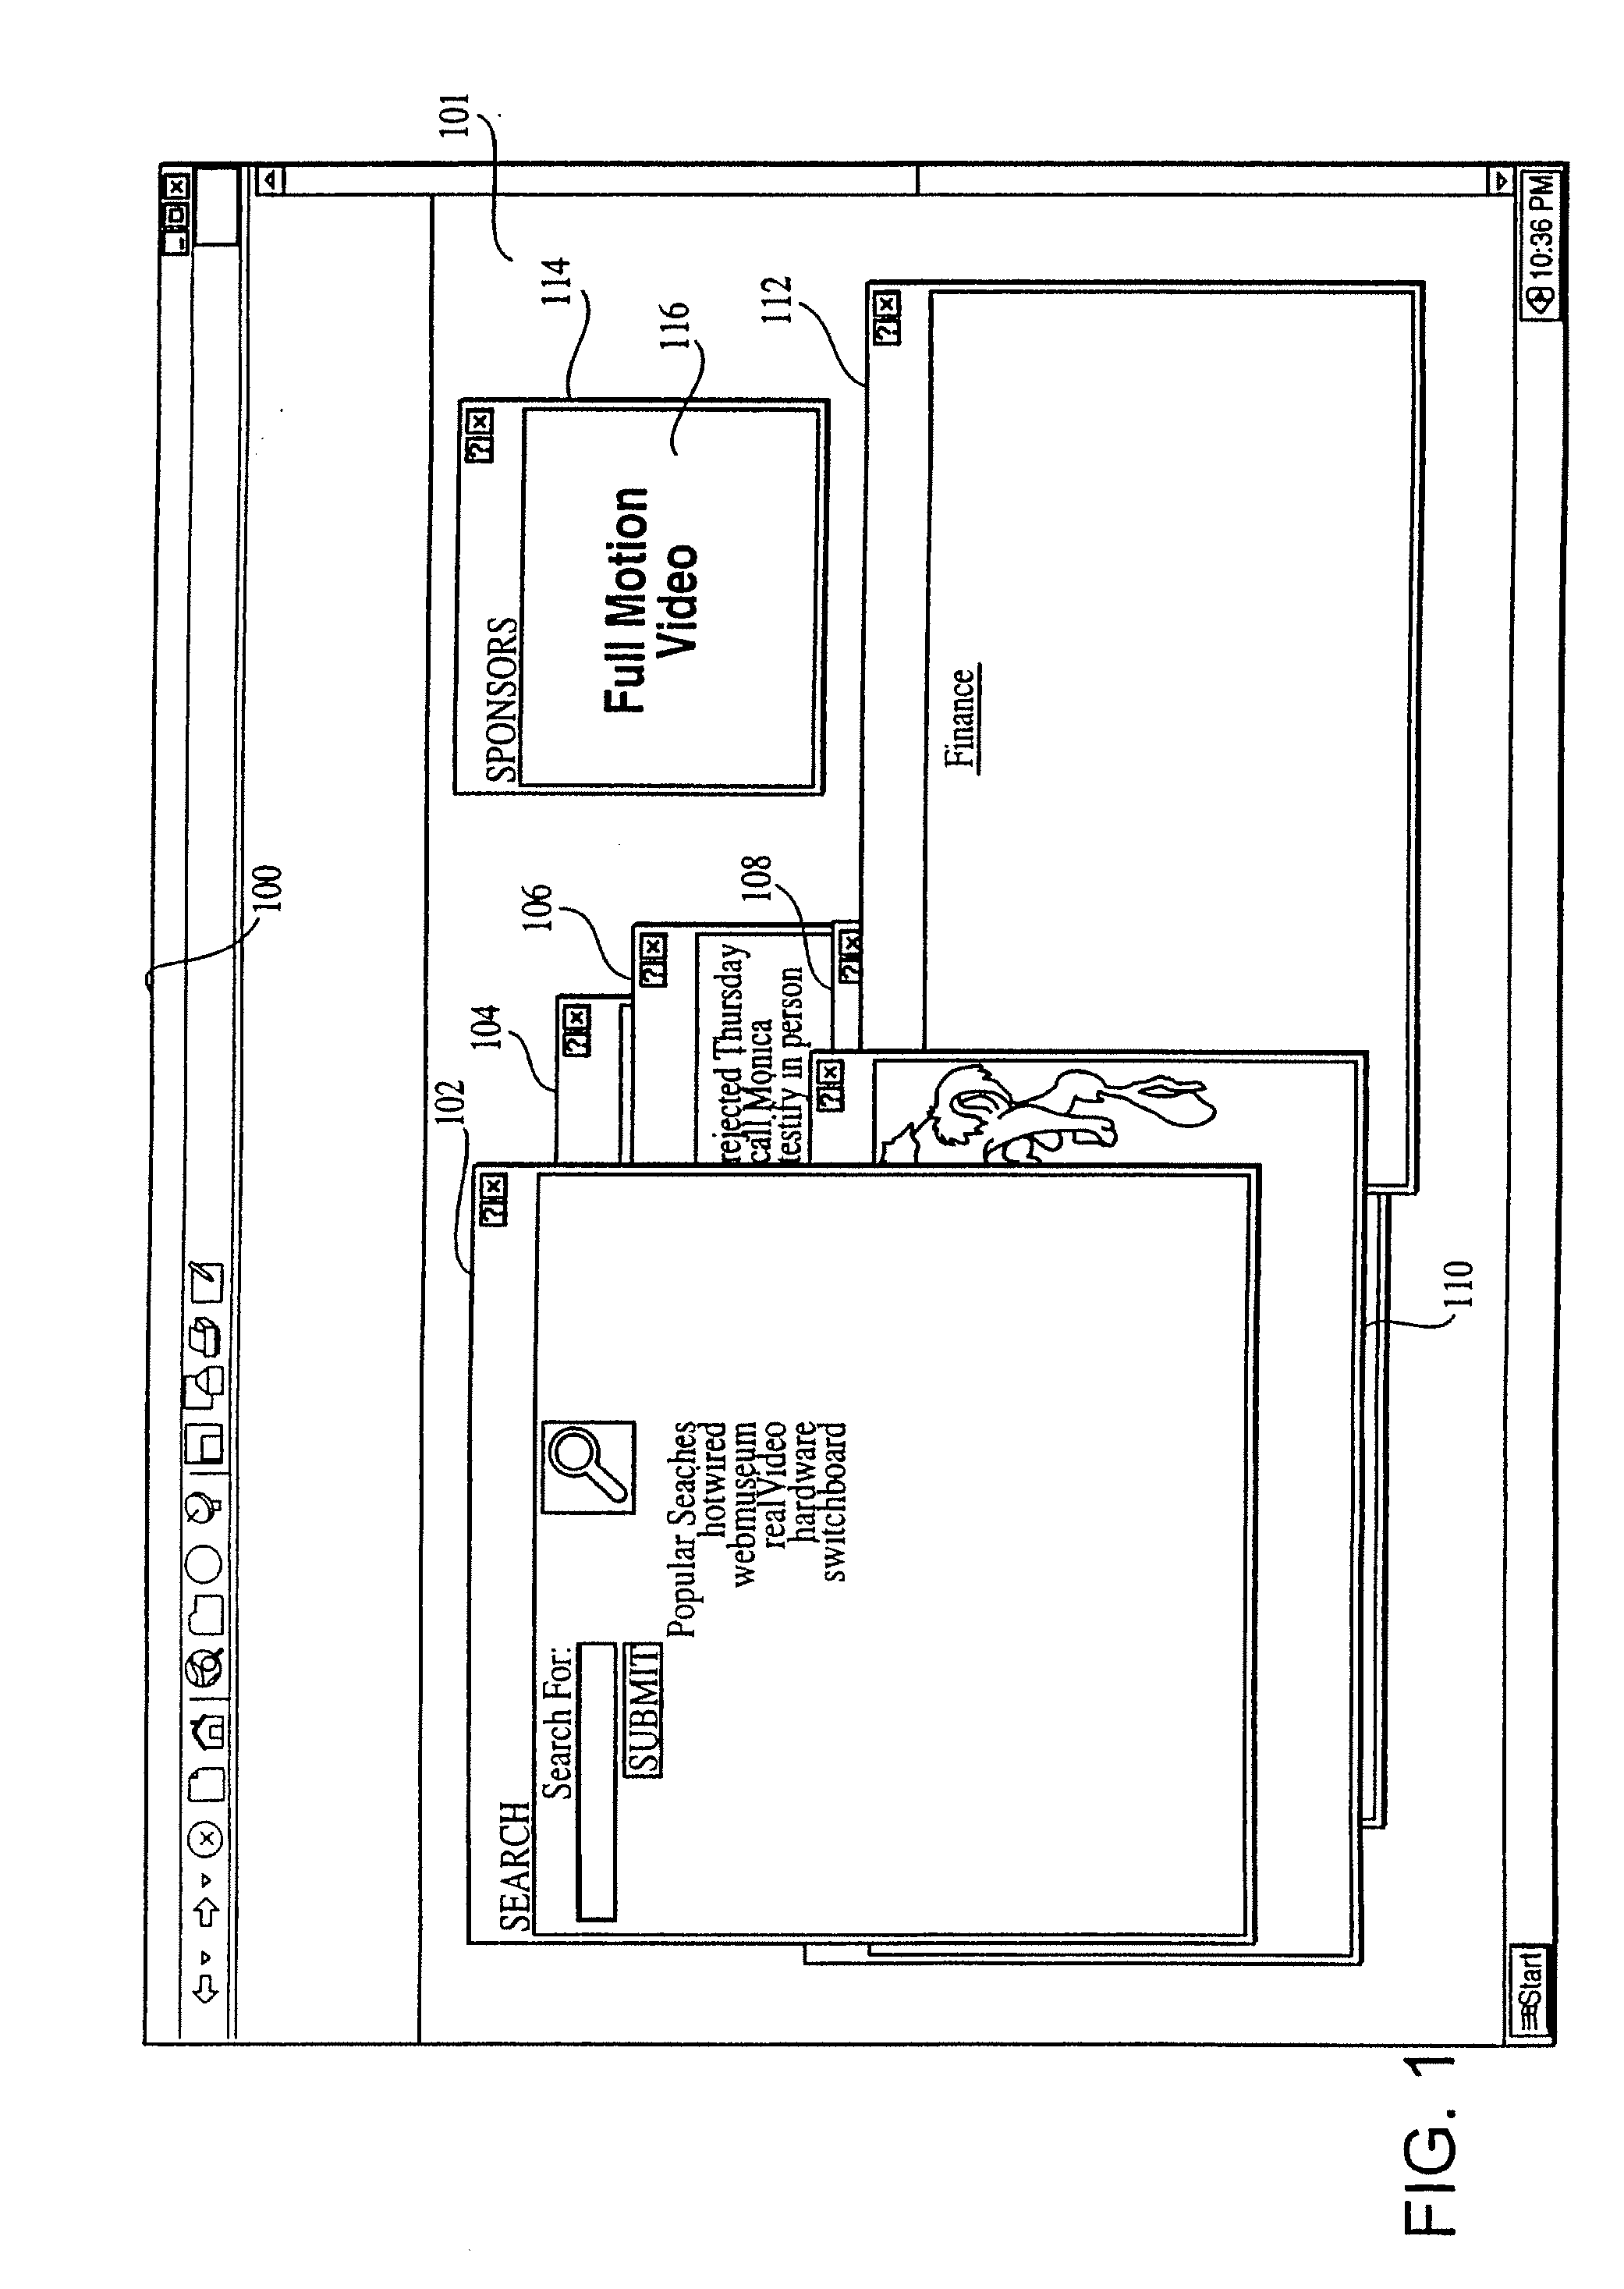 System and Method for Providing a Dynamic Advertising Content Window within a Windows Based Content Mainfestation Environment Provided in a Browser